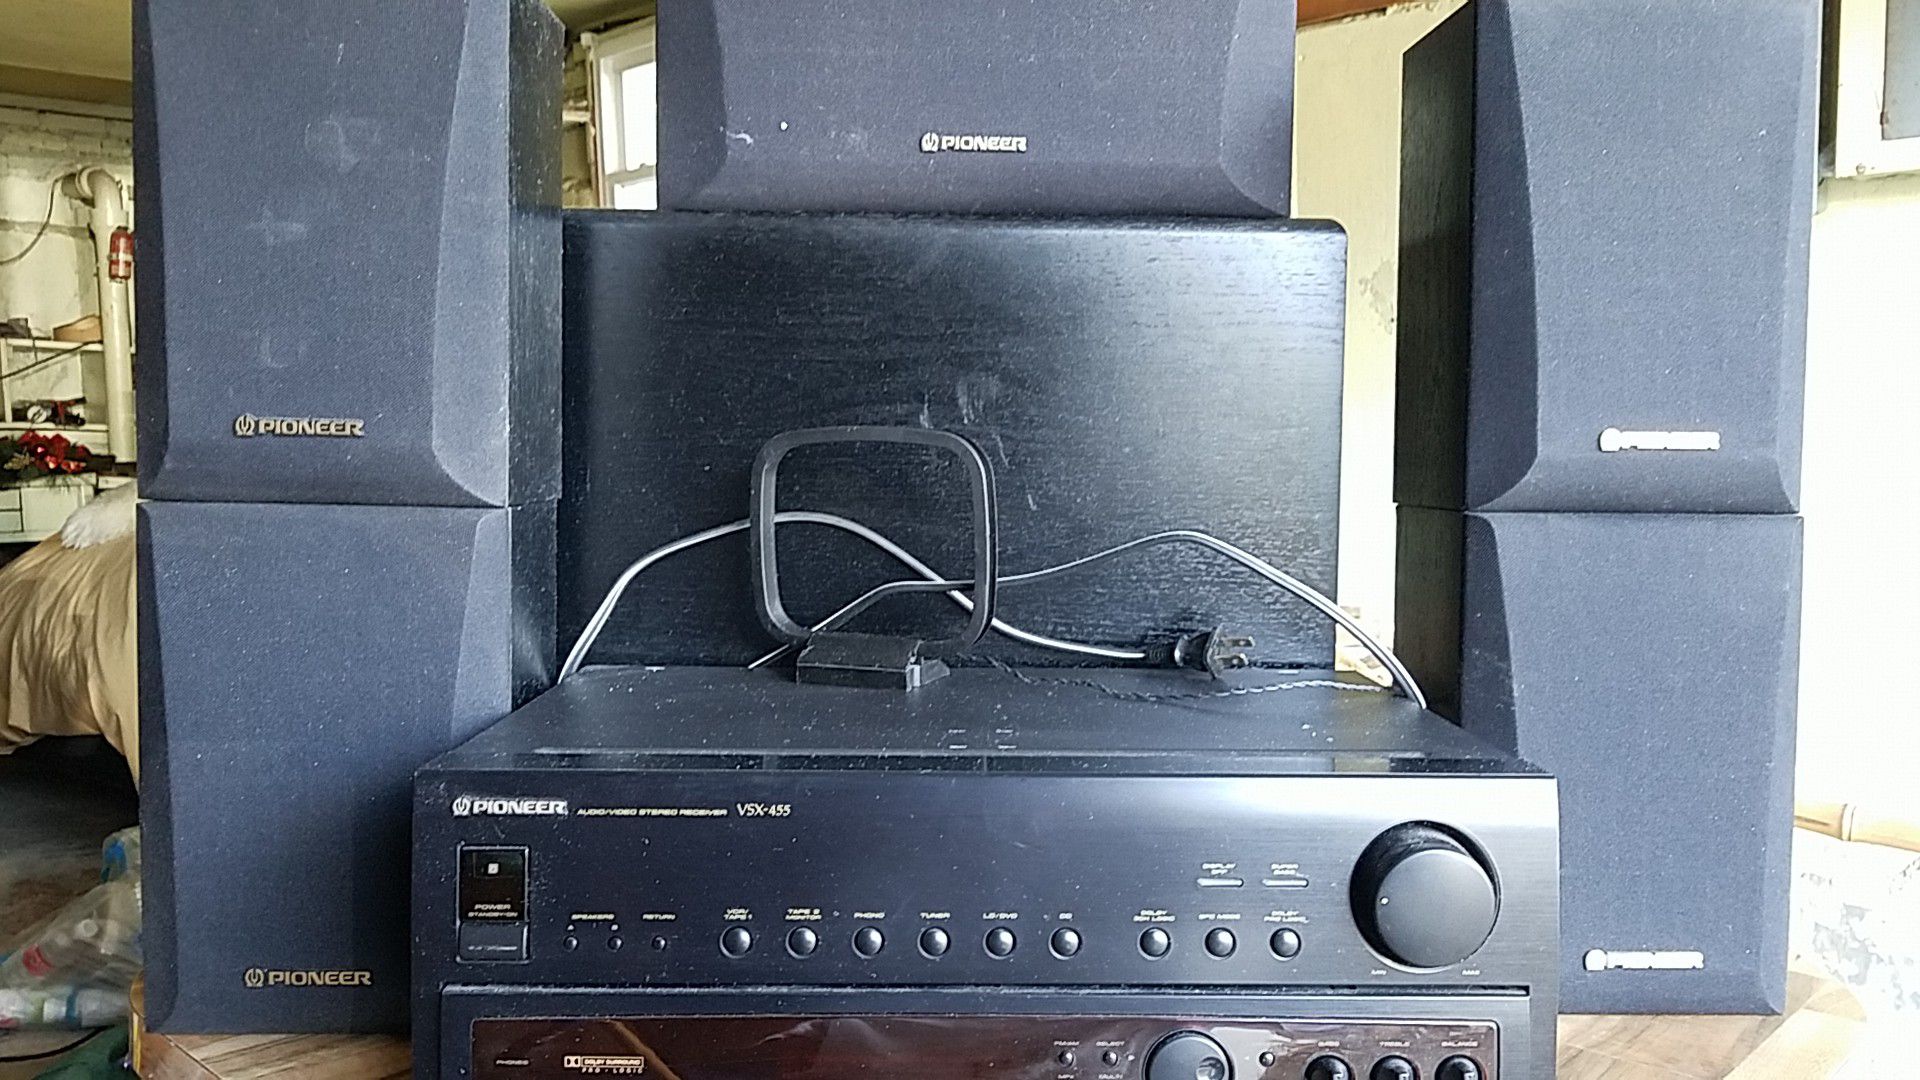 Pioneer receiver, speakers and sub